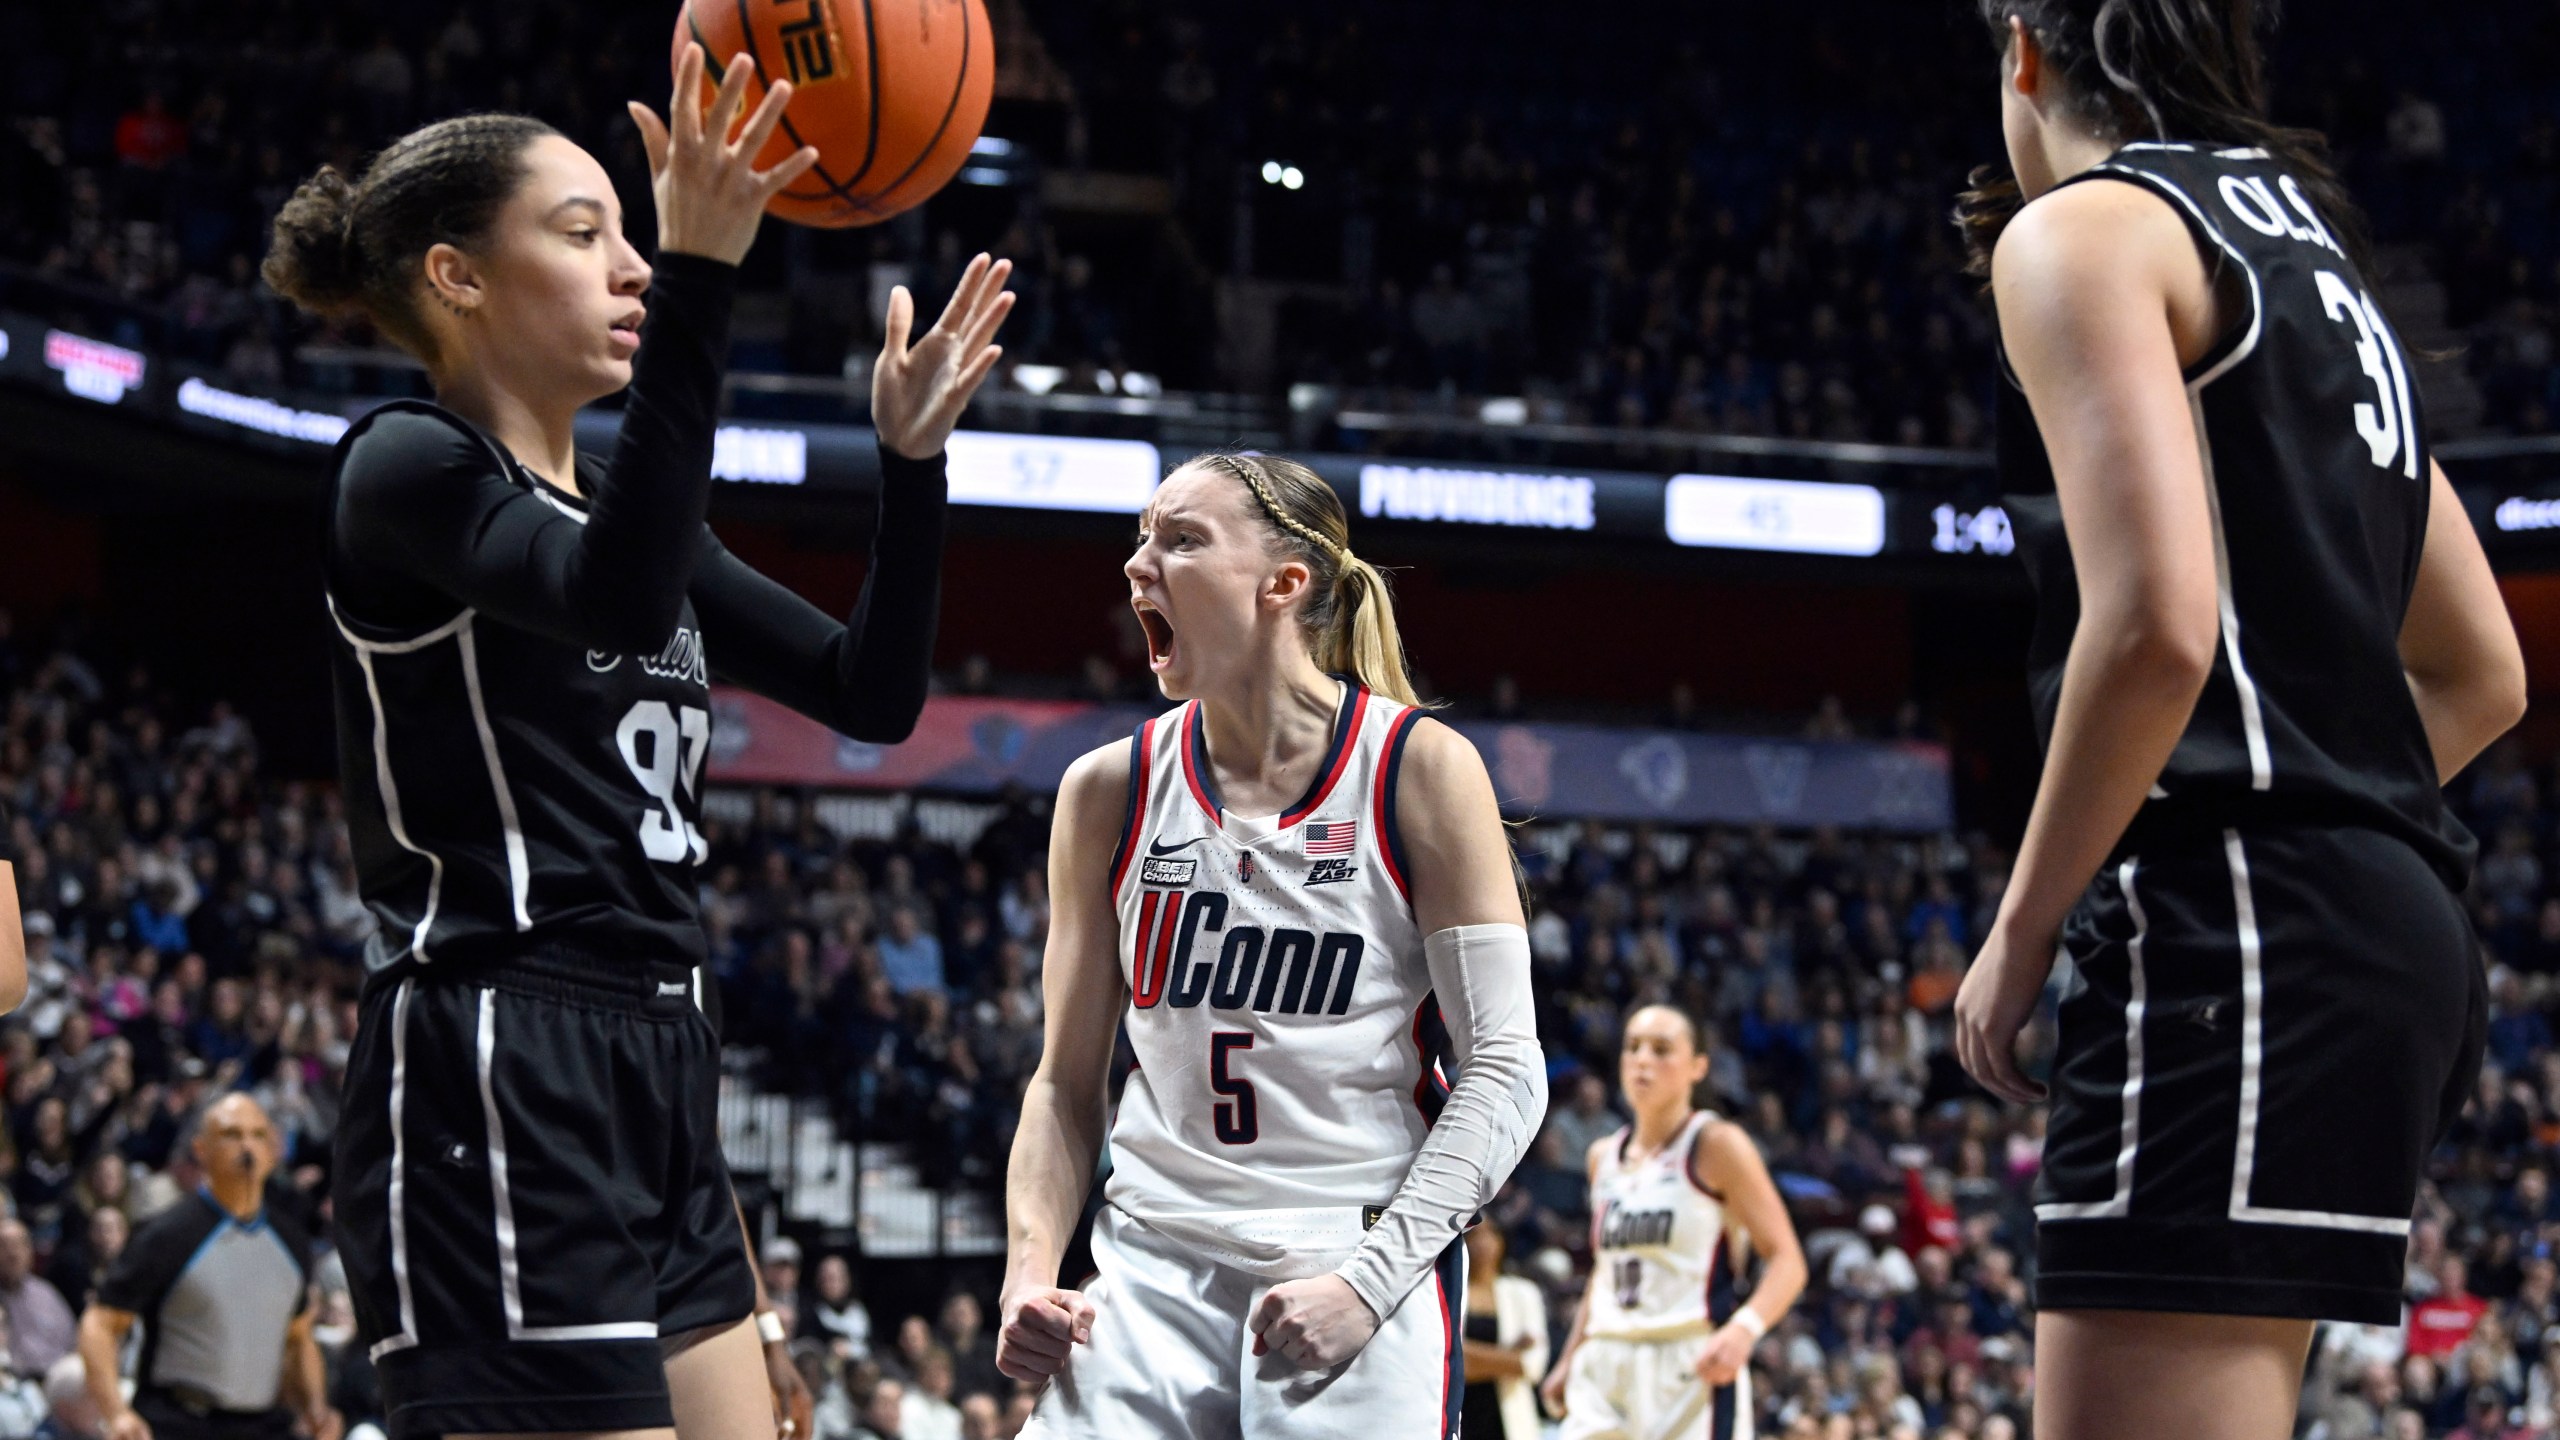 UConn guard Paige Bueckers (5) reacts to drawing a foul against Providence during an NCAA college basketball game in the quarterfinals of the a Big East tournament, Saturday, March 9, 2024, at the Mohegan Sun Arena in Uncasville, Conn. (Cloe Poisson/Hartford Courant via AP)